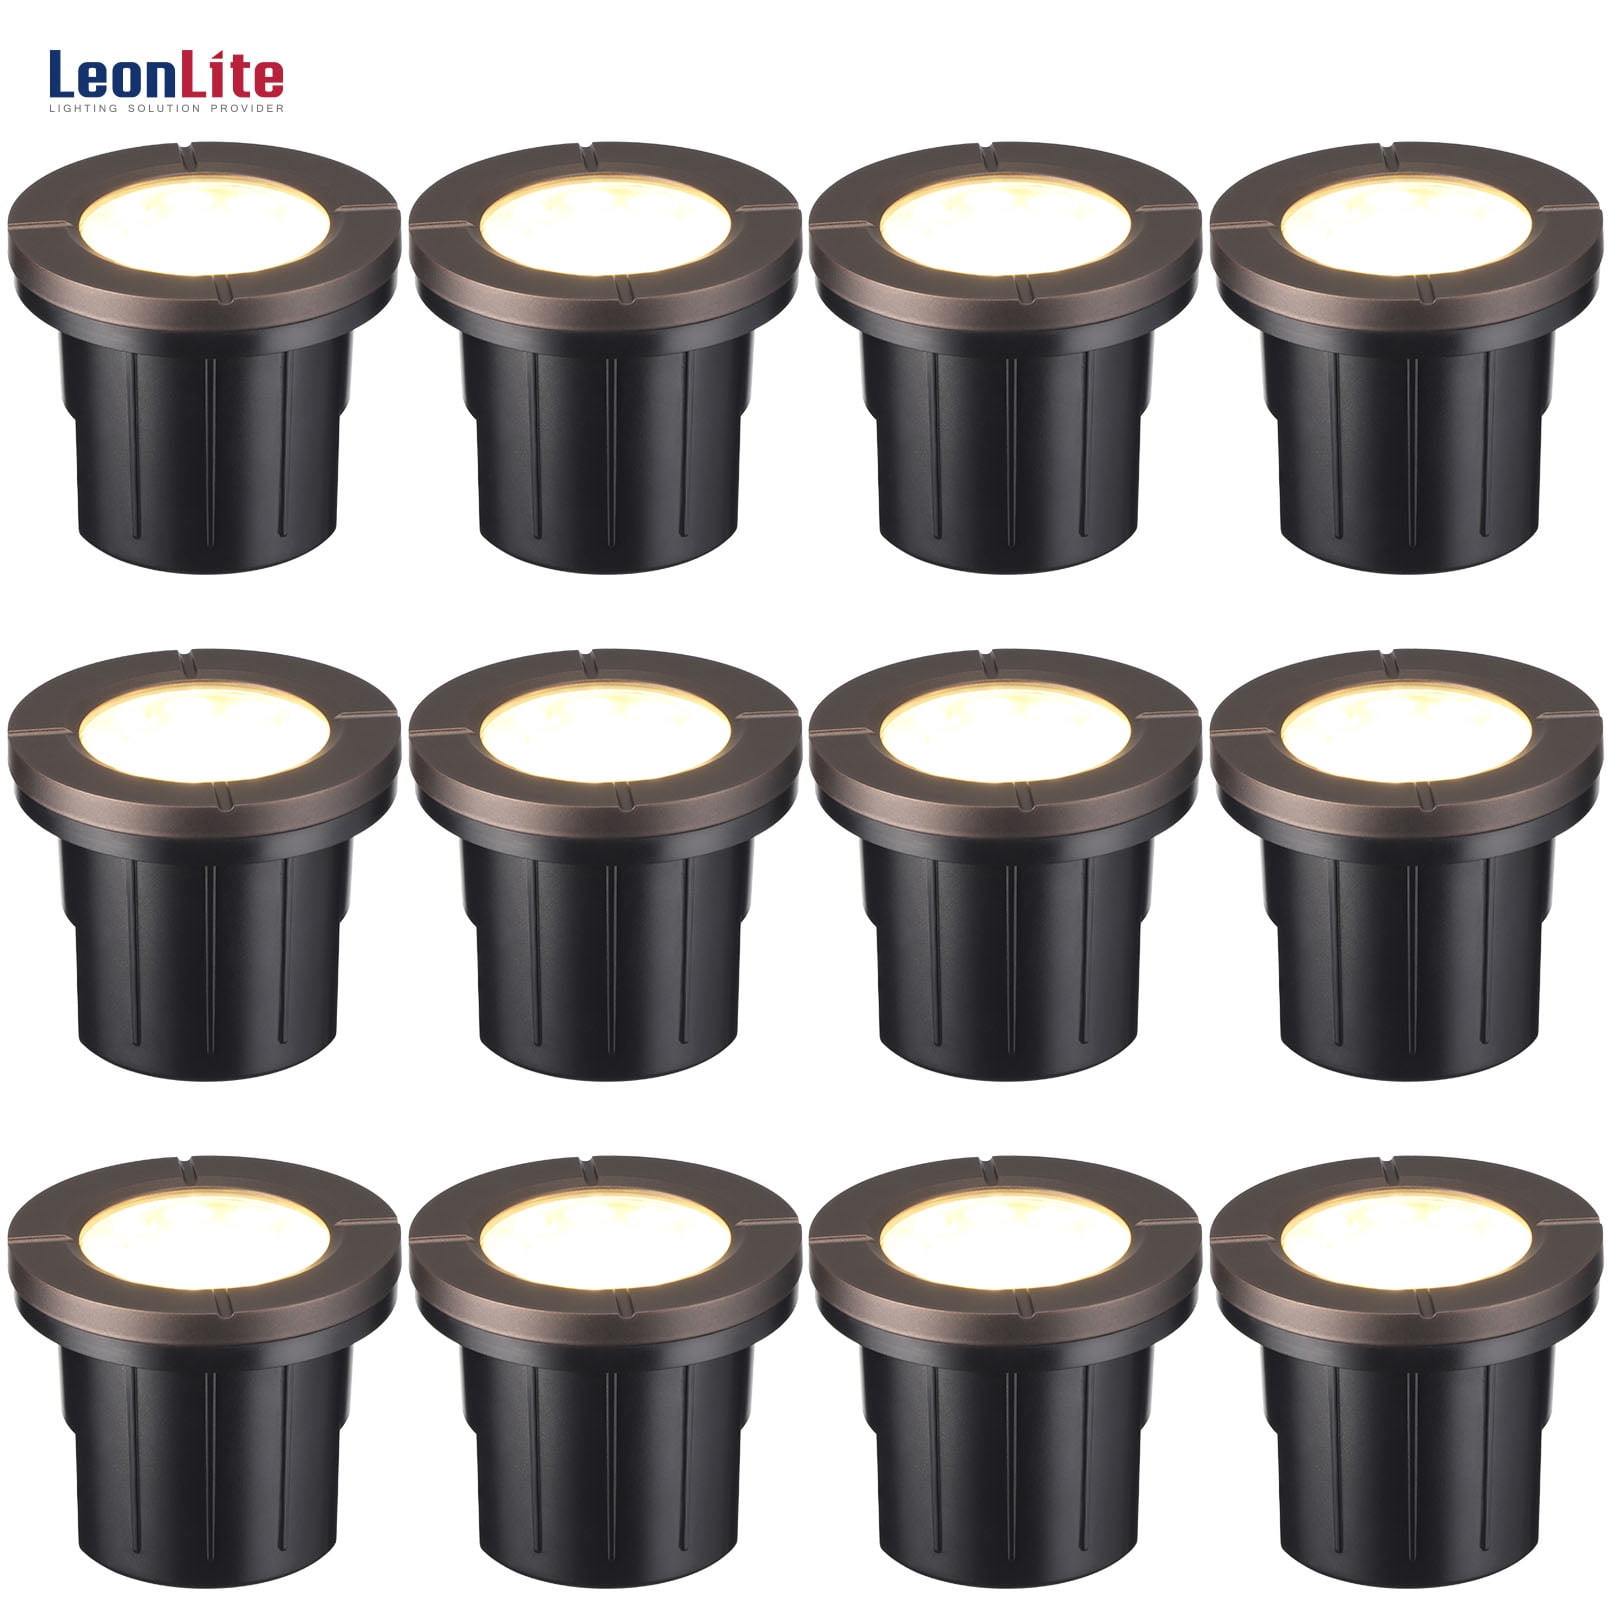 Leonlite 12-Pack 6W LED Well Light for Yard, Garden, Patio, 12-24V Low  Voltage Flat Top In-Ground Lighting, 3000K Warm White, UL Listed Cable,  IP67 Waterproof Landscape light